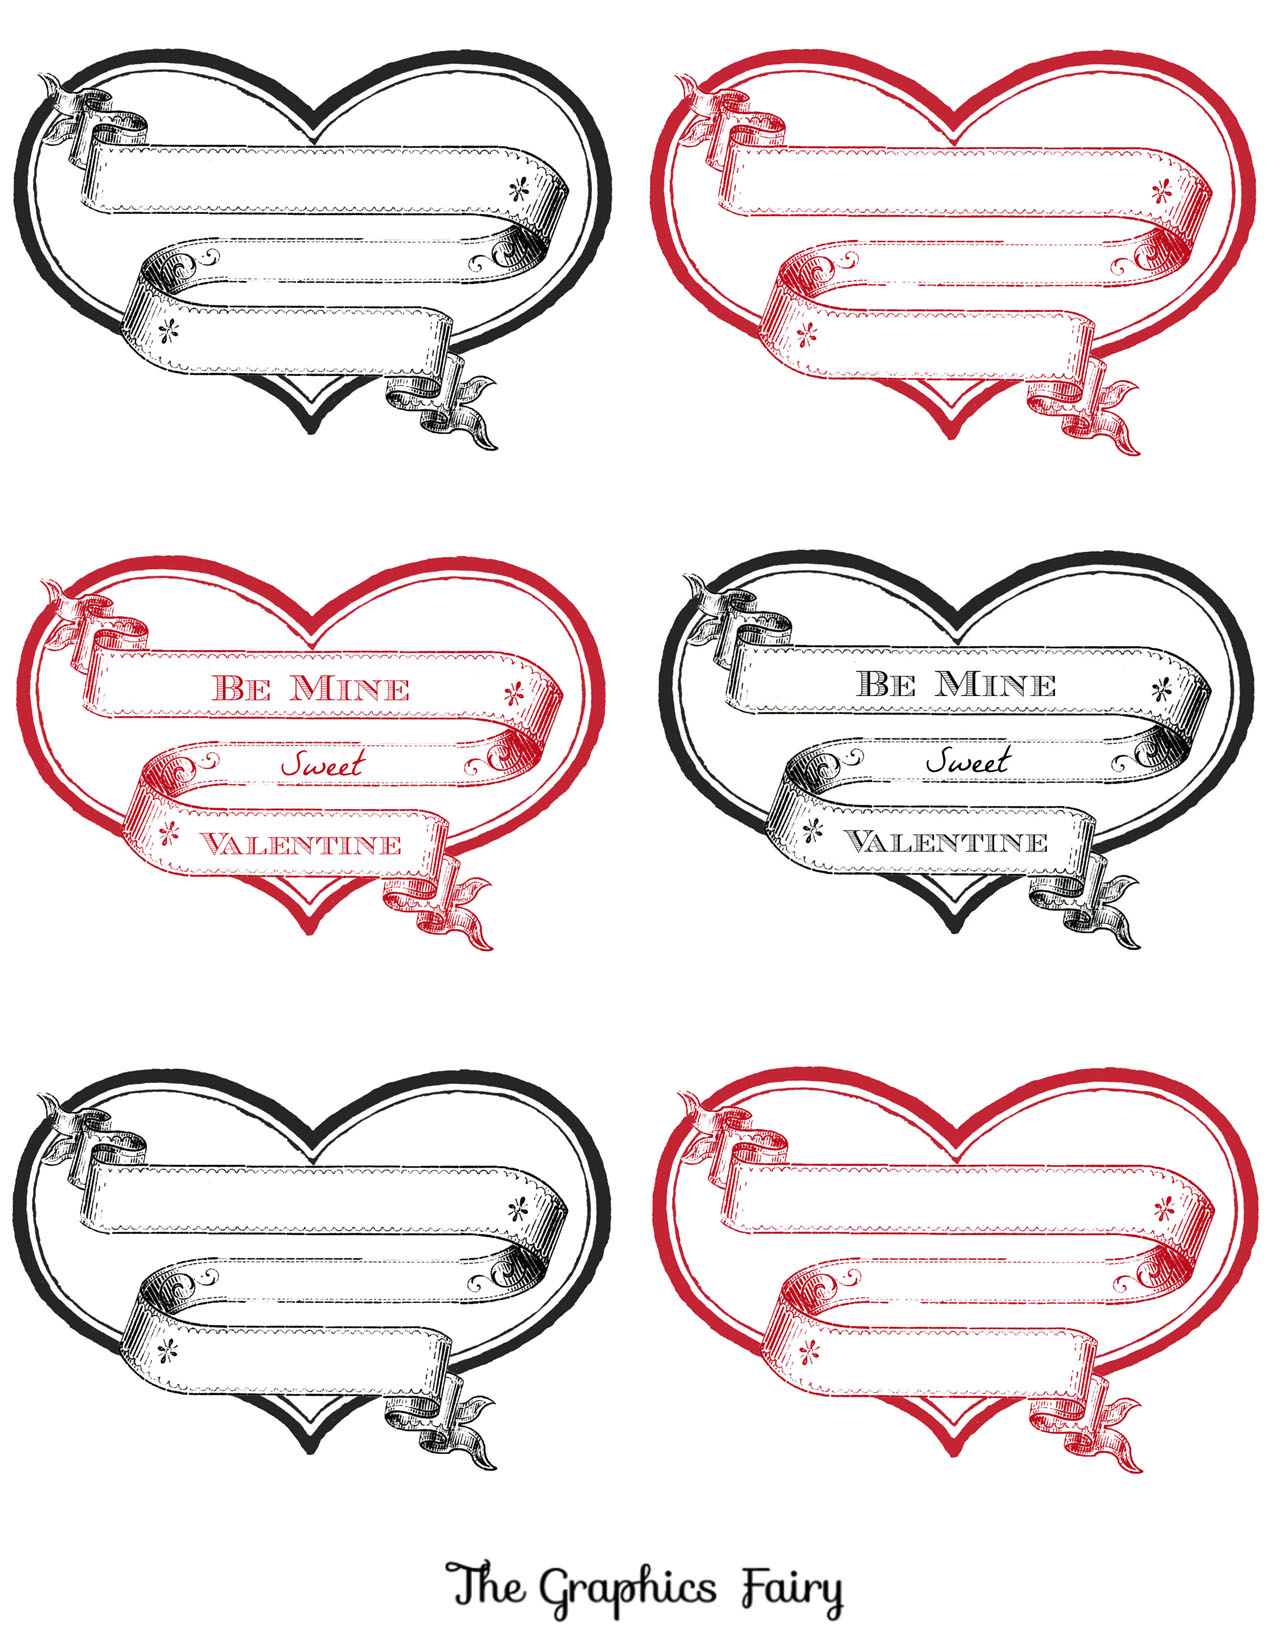 12 Printable Valentine Heart Images! - The Graphics Fairy